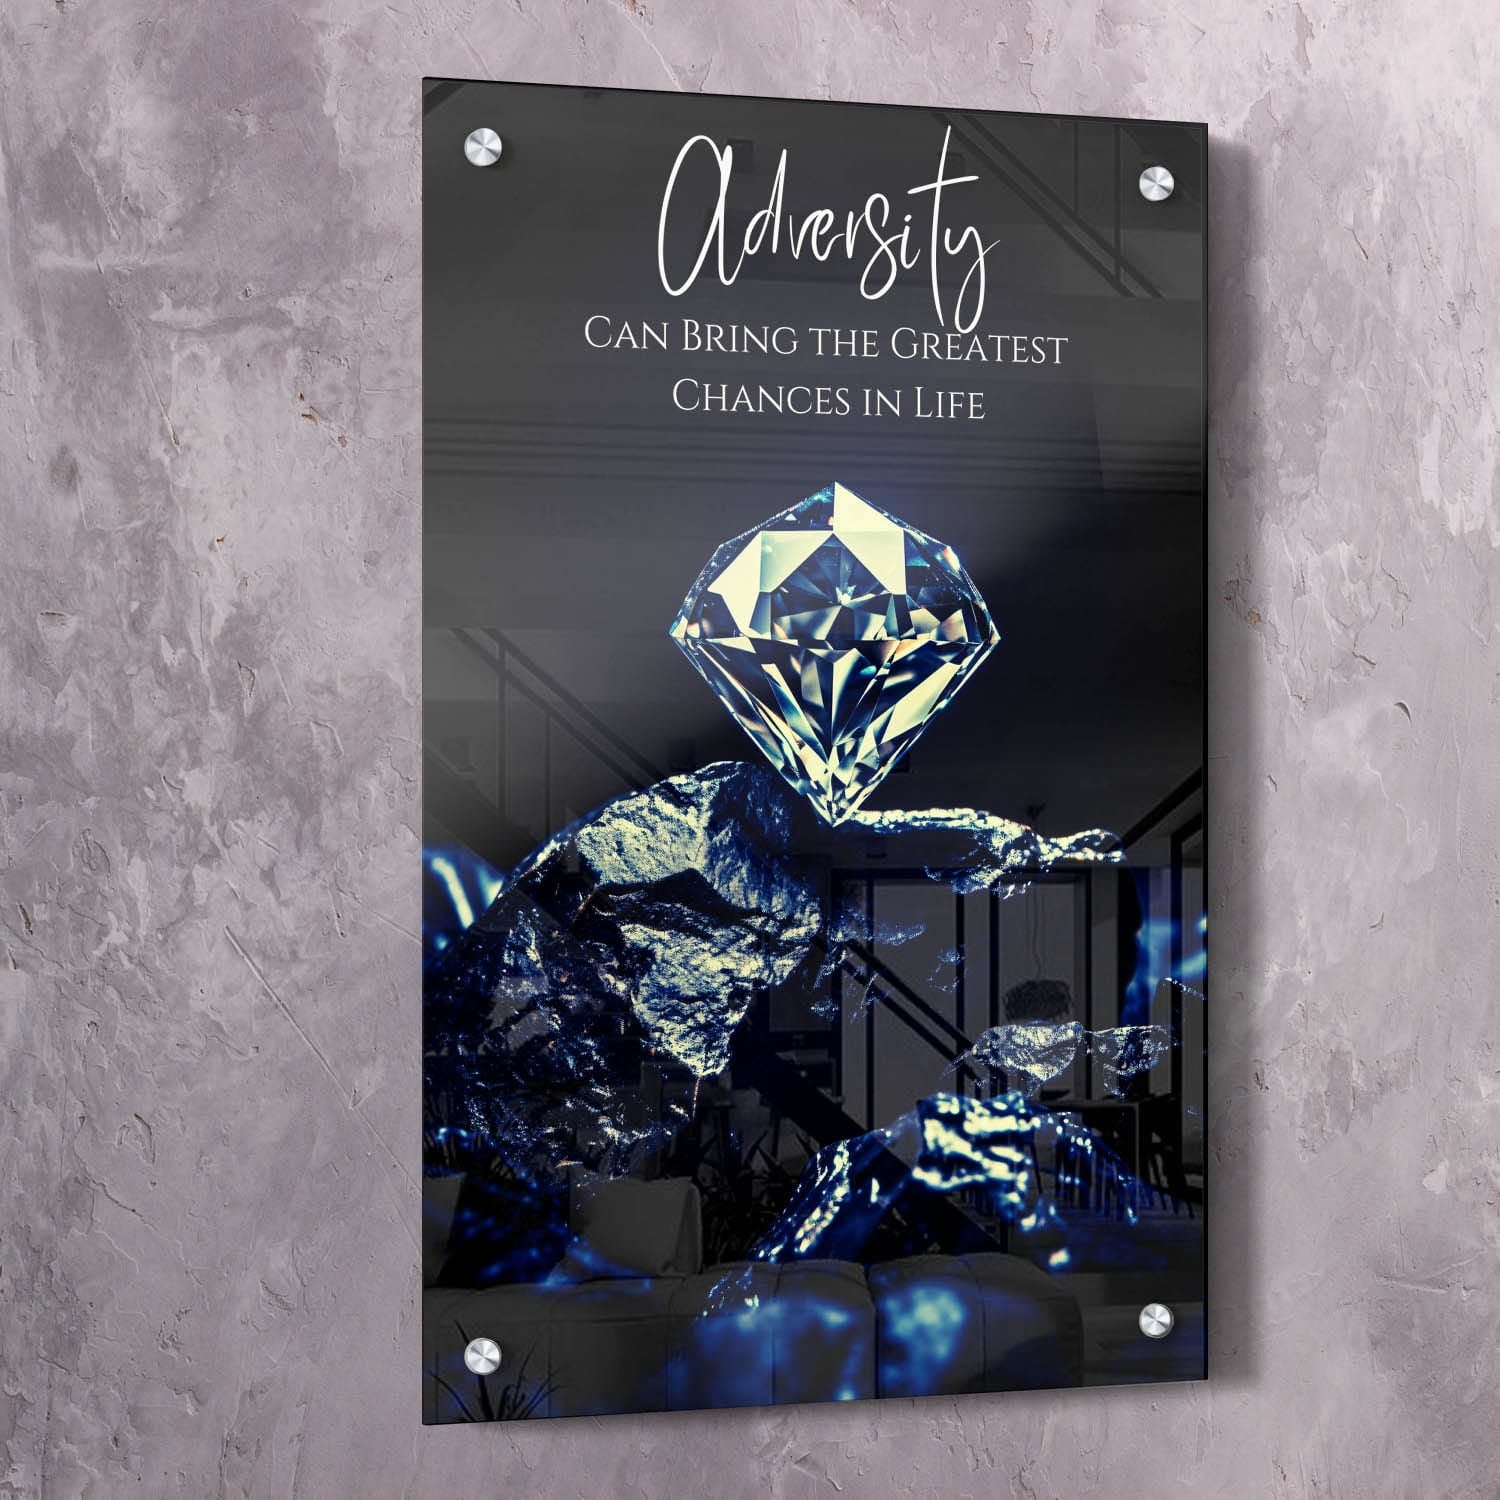 Coal's Diamond - Adversity can bring the greatest chances in life Quote Wall Art | Inspirational Wall Art Motivational Wall Art Quotes Office Art | ImpaktMaker Exclusive Canvas Art Portrait